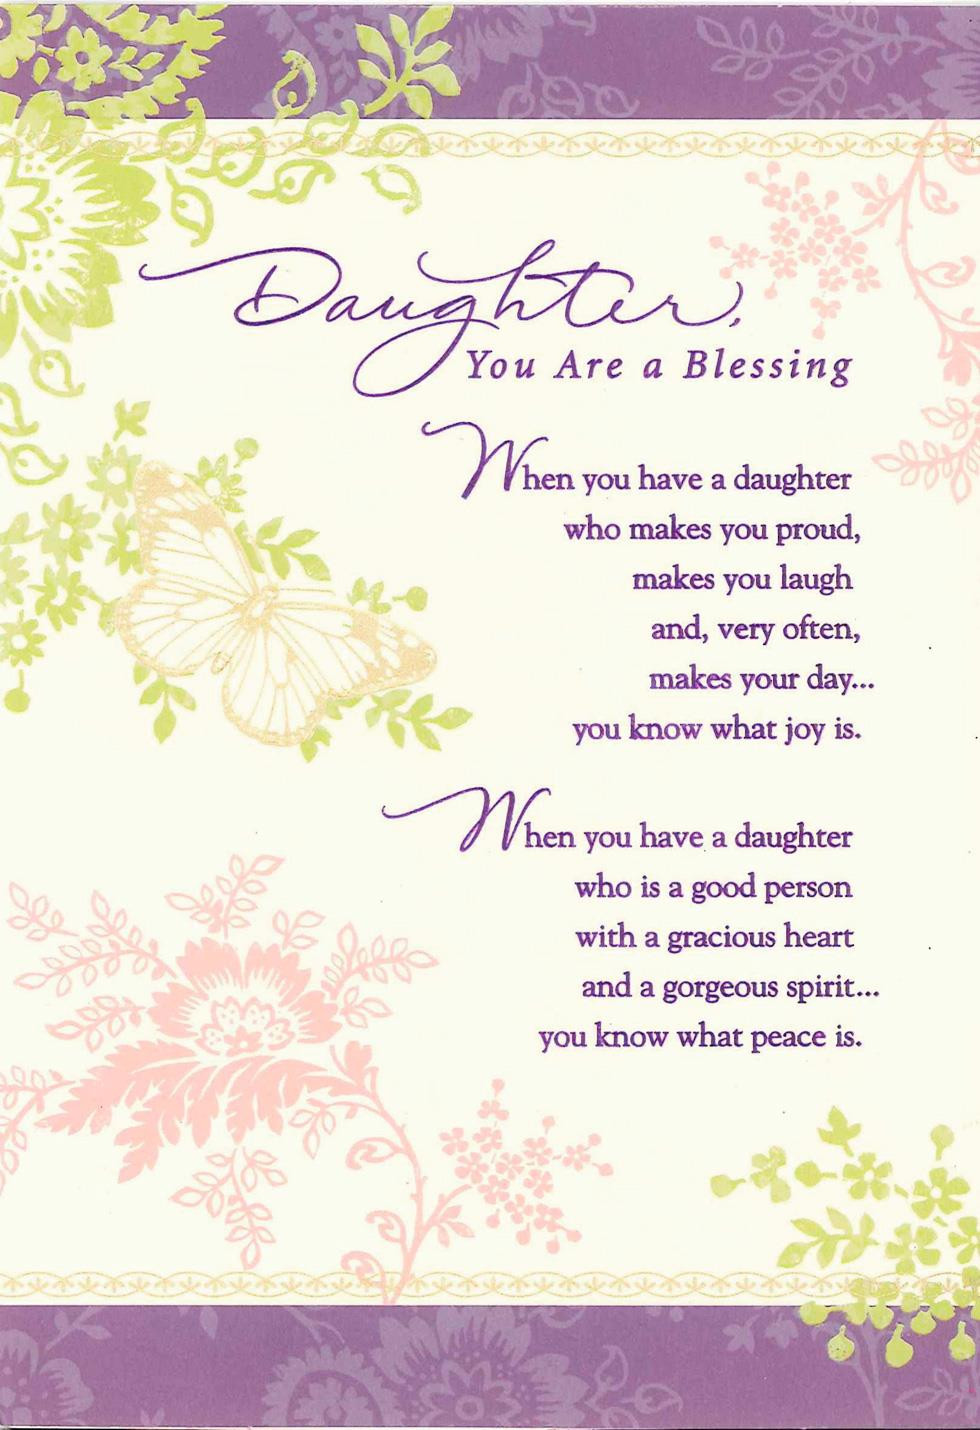 Free Birthday Cards For Daughter
 Gold Butterfly You Are a Blessing Birthday Card for